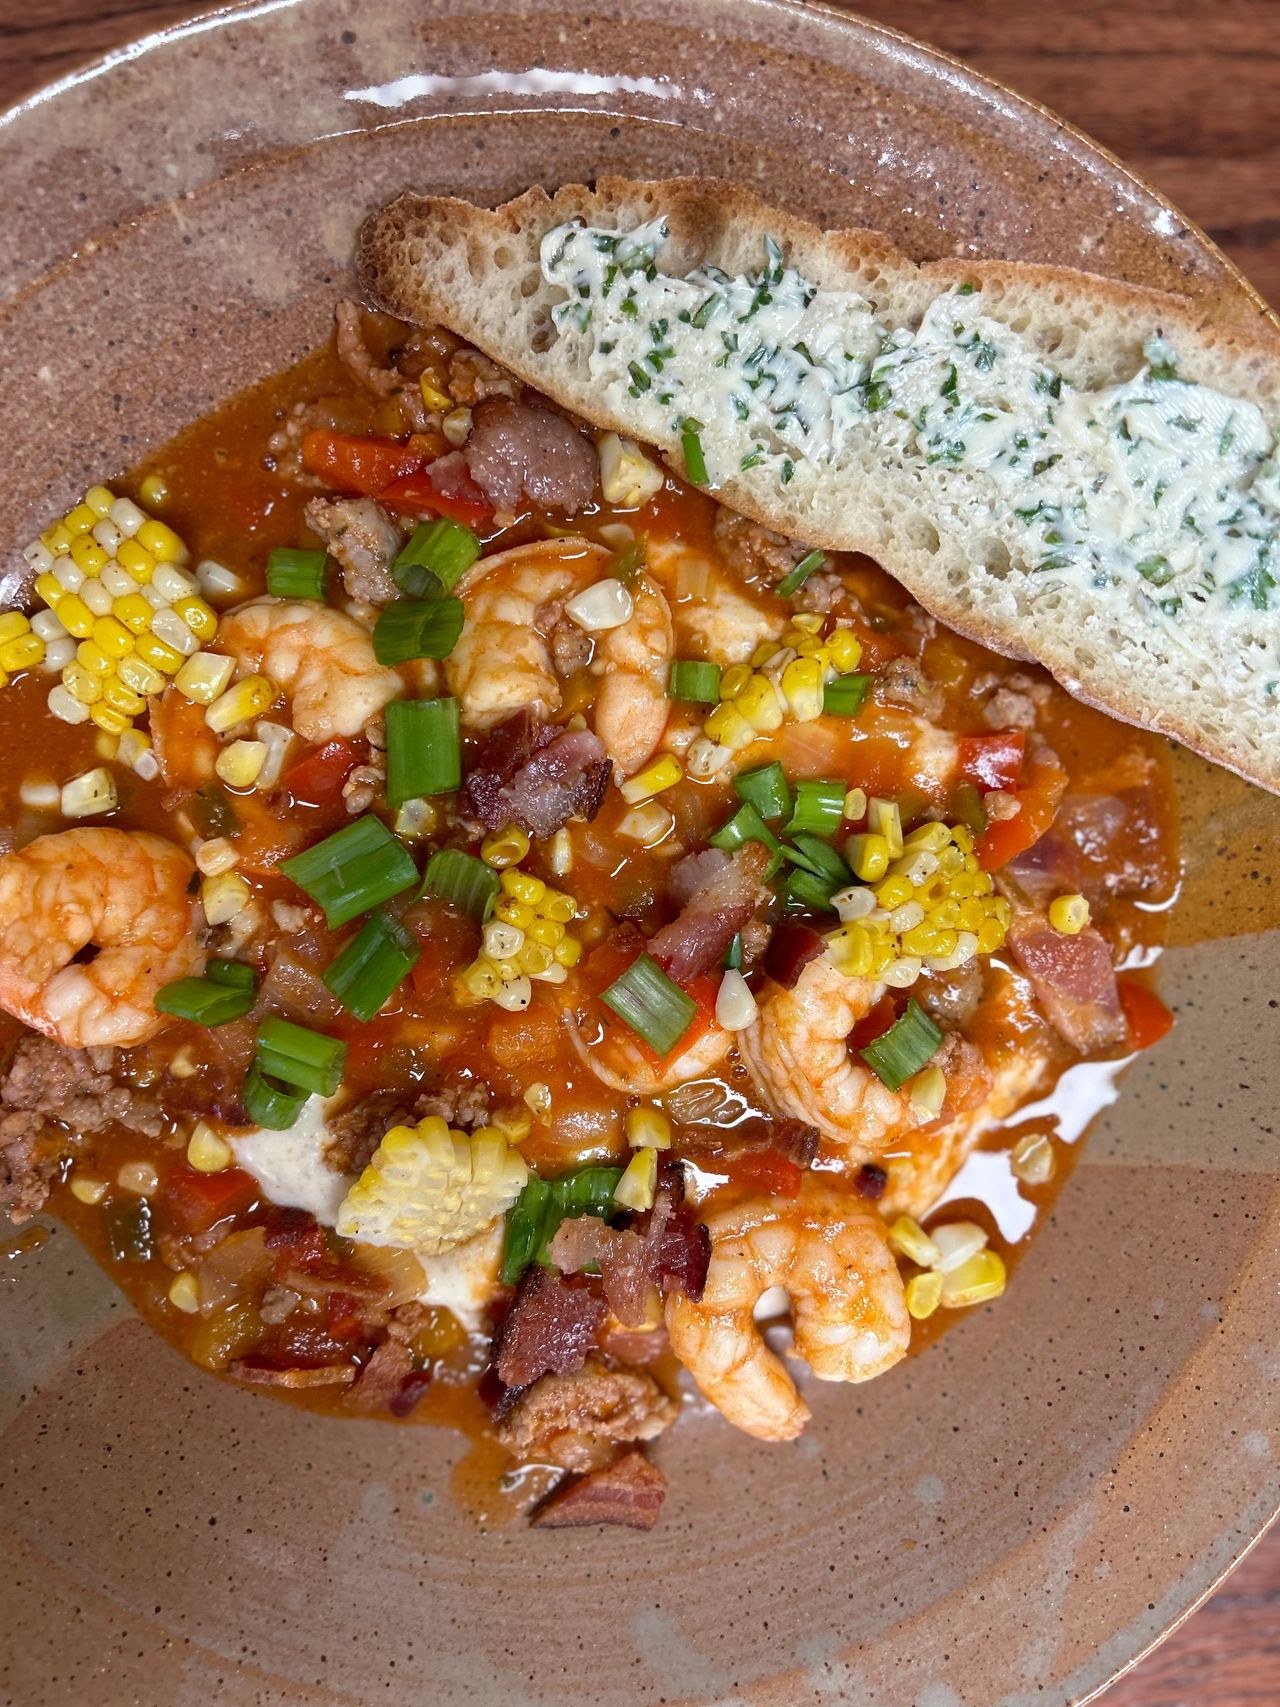 Shrimp and grits in pottery bowl with piece of buttered bread